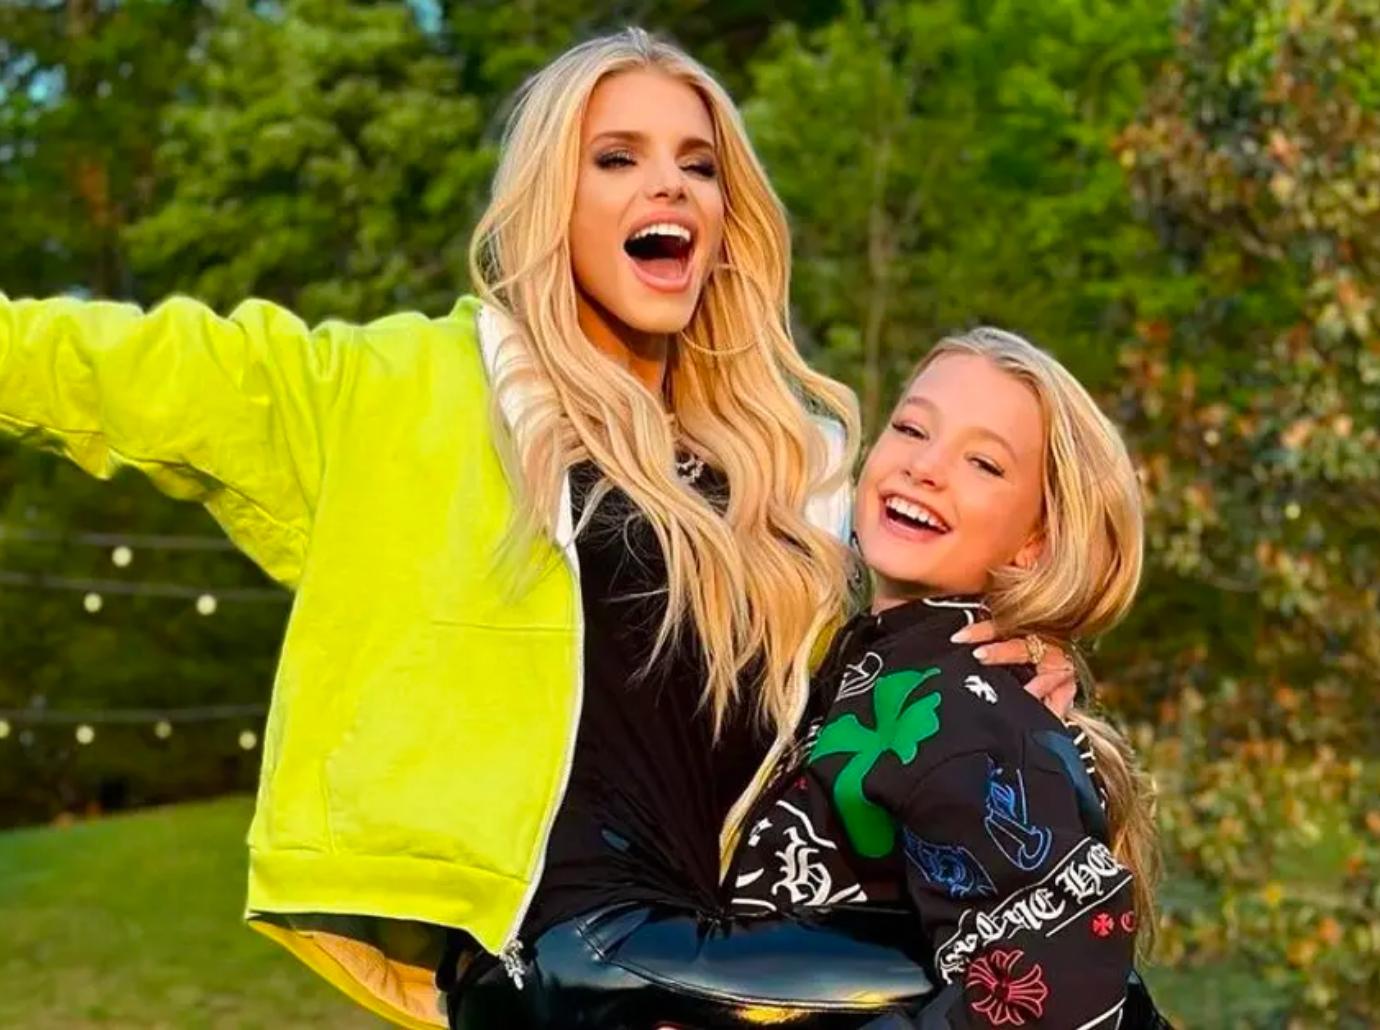 Jessica Simpson Shares Adorable Selfie With Mini-Me Daughter Maxi, 11